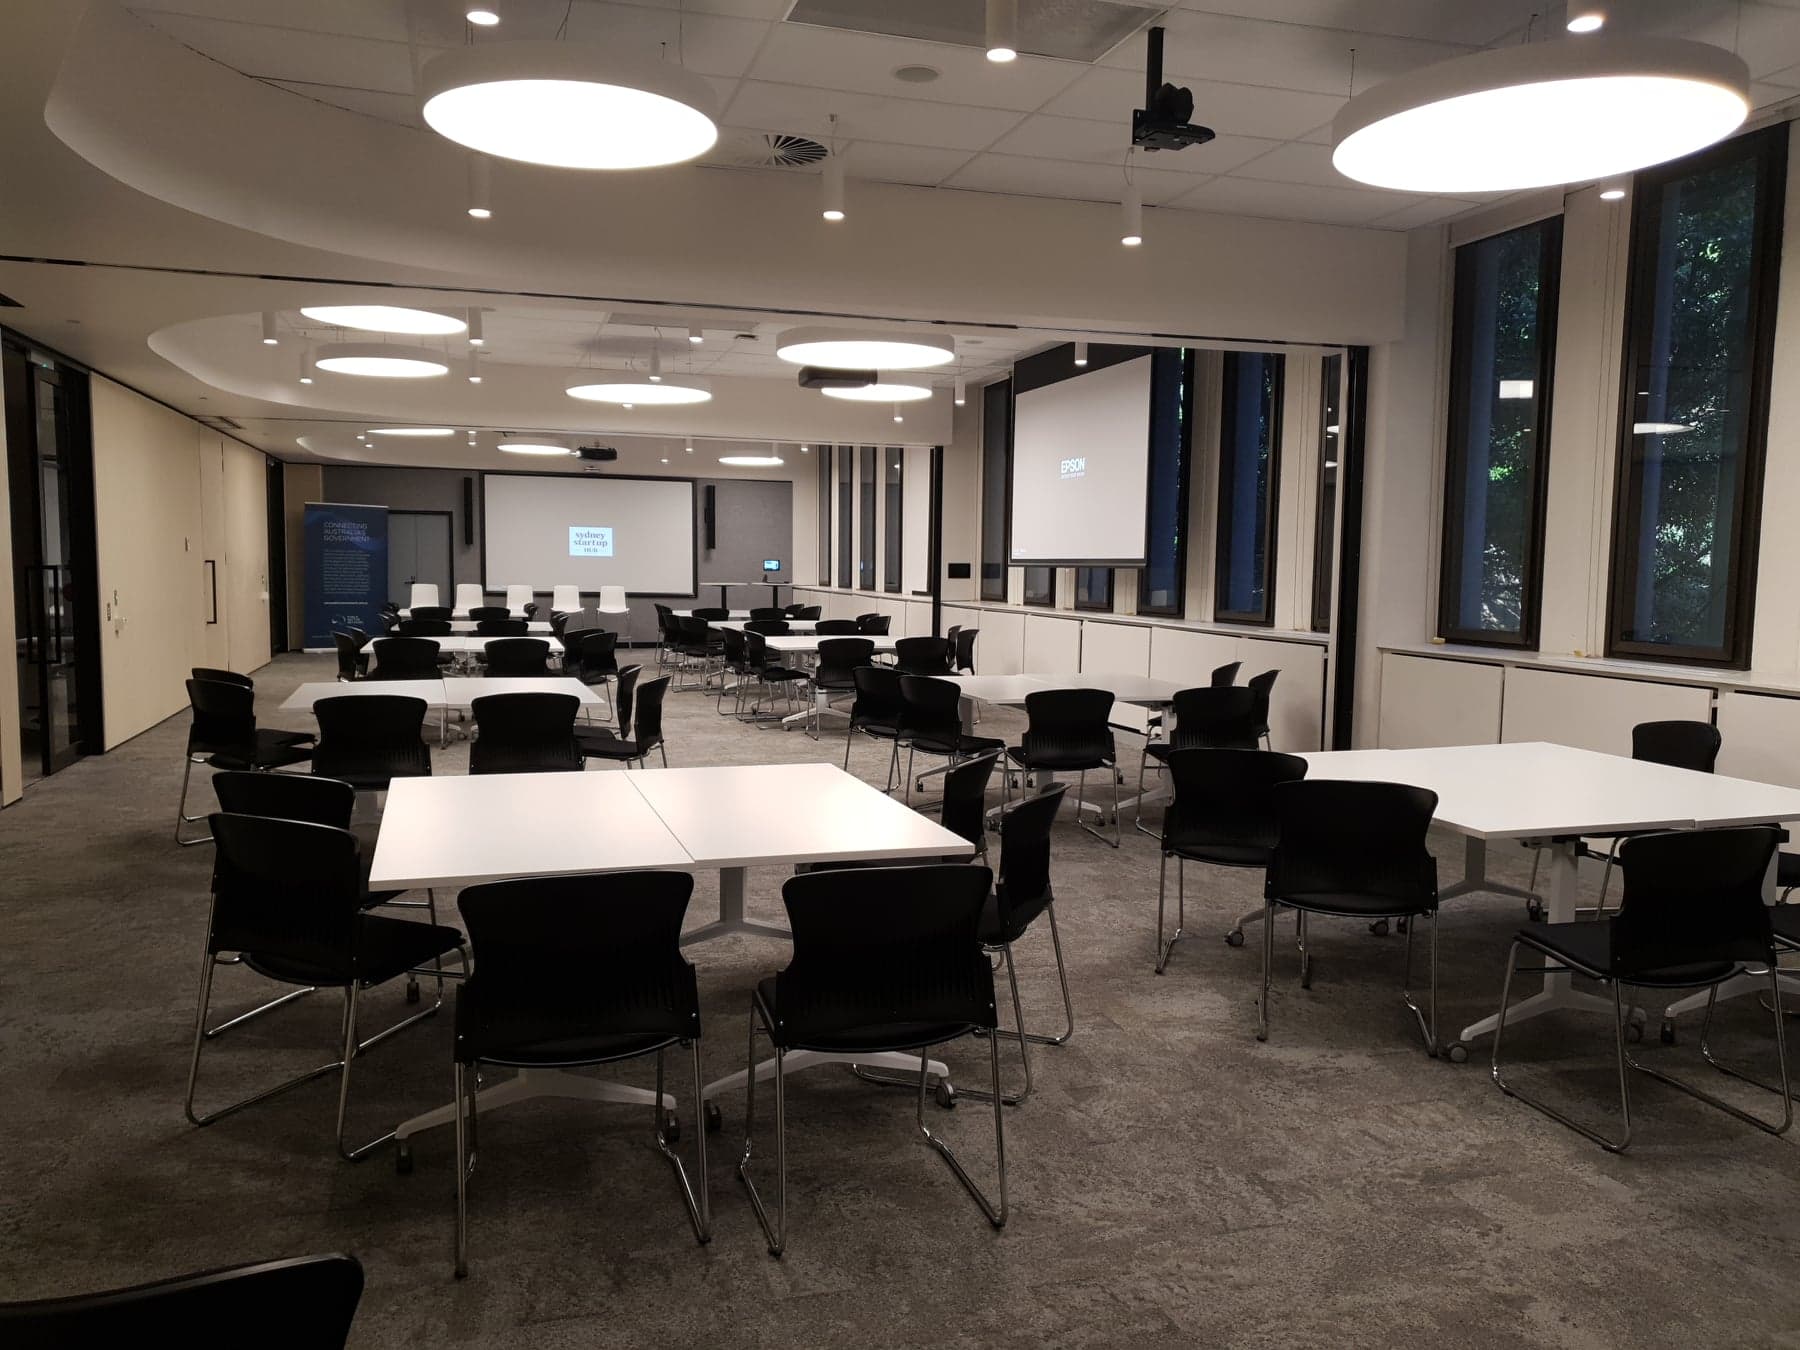 Event Rooms 1, 2 and 3 – Classroom